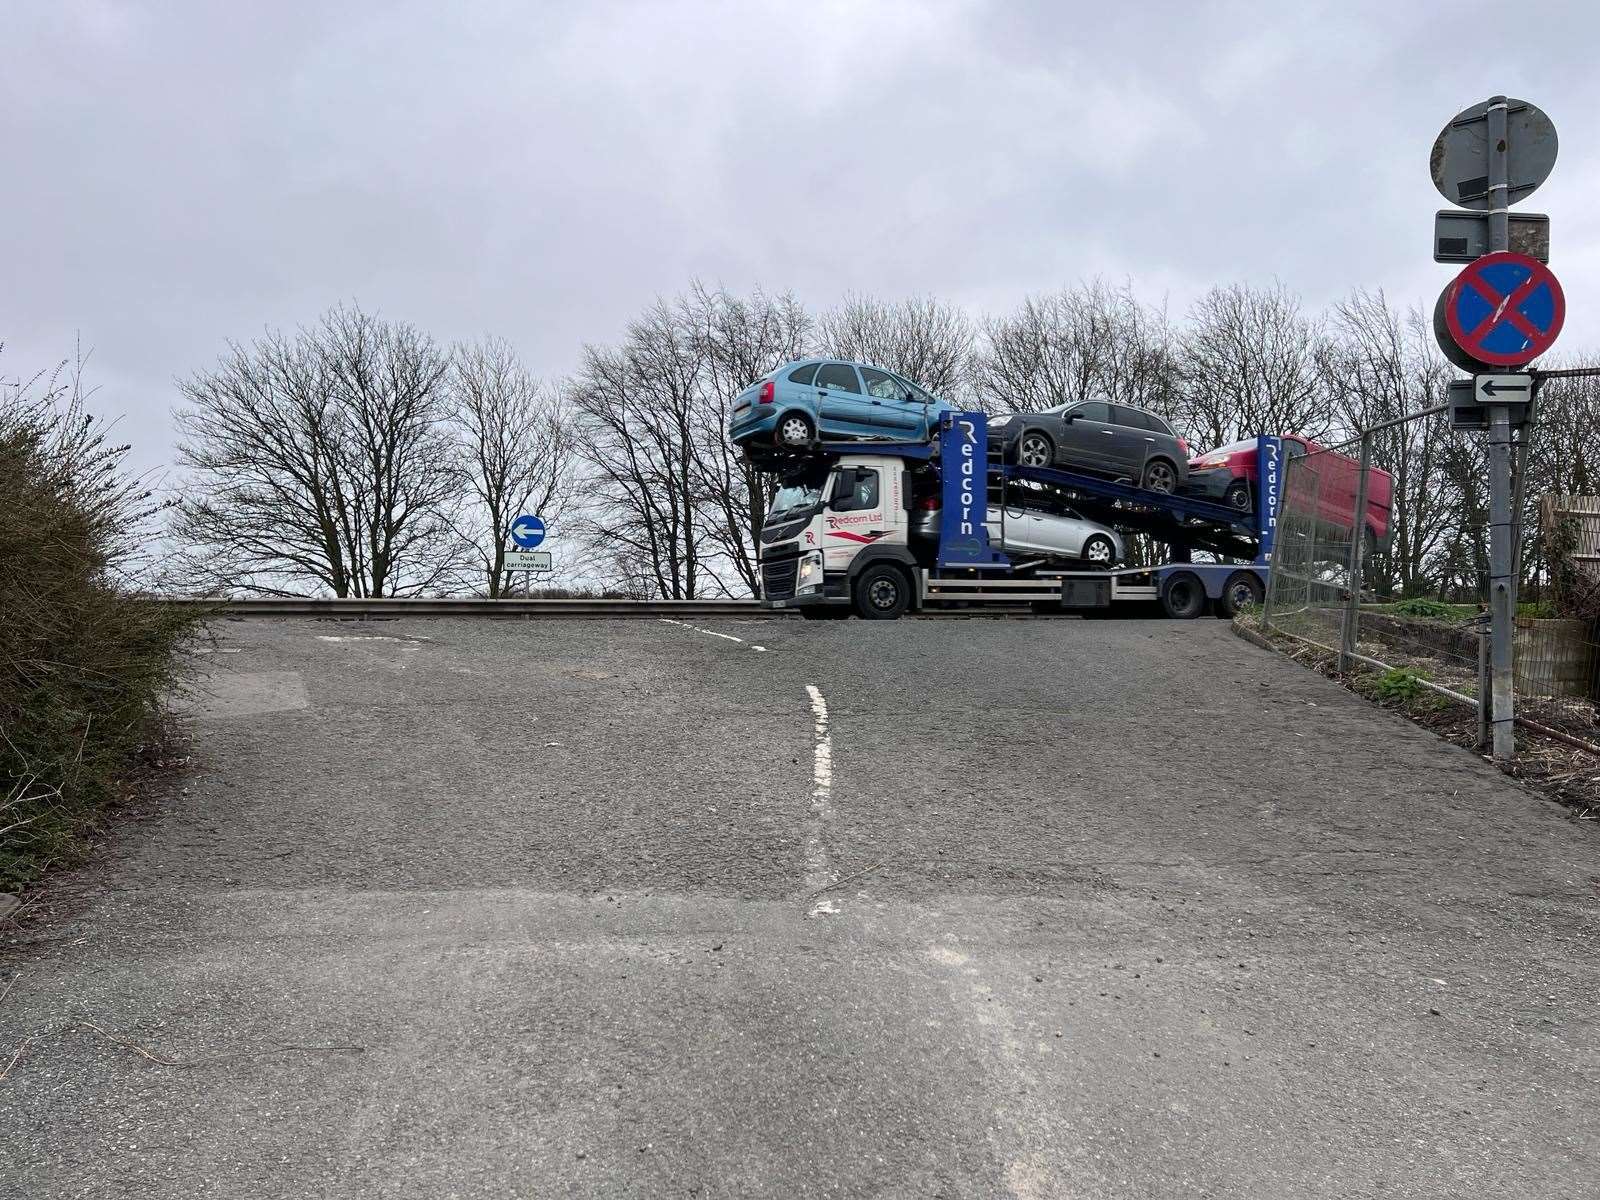 Drivers pulling out onto the A2 from Out Elmstead Lane face a standing hill start. Picture: Mike Sole